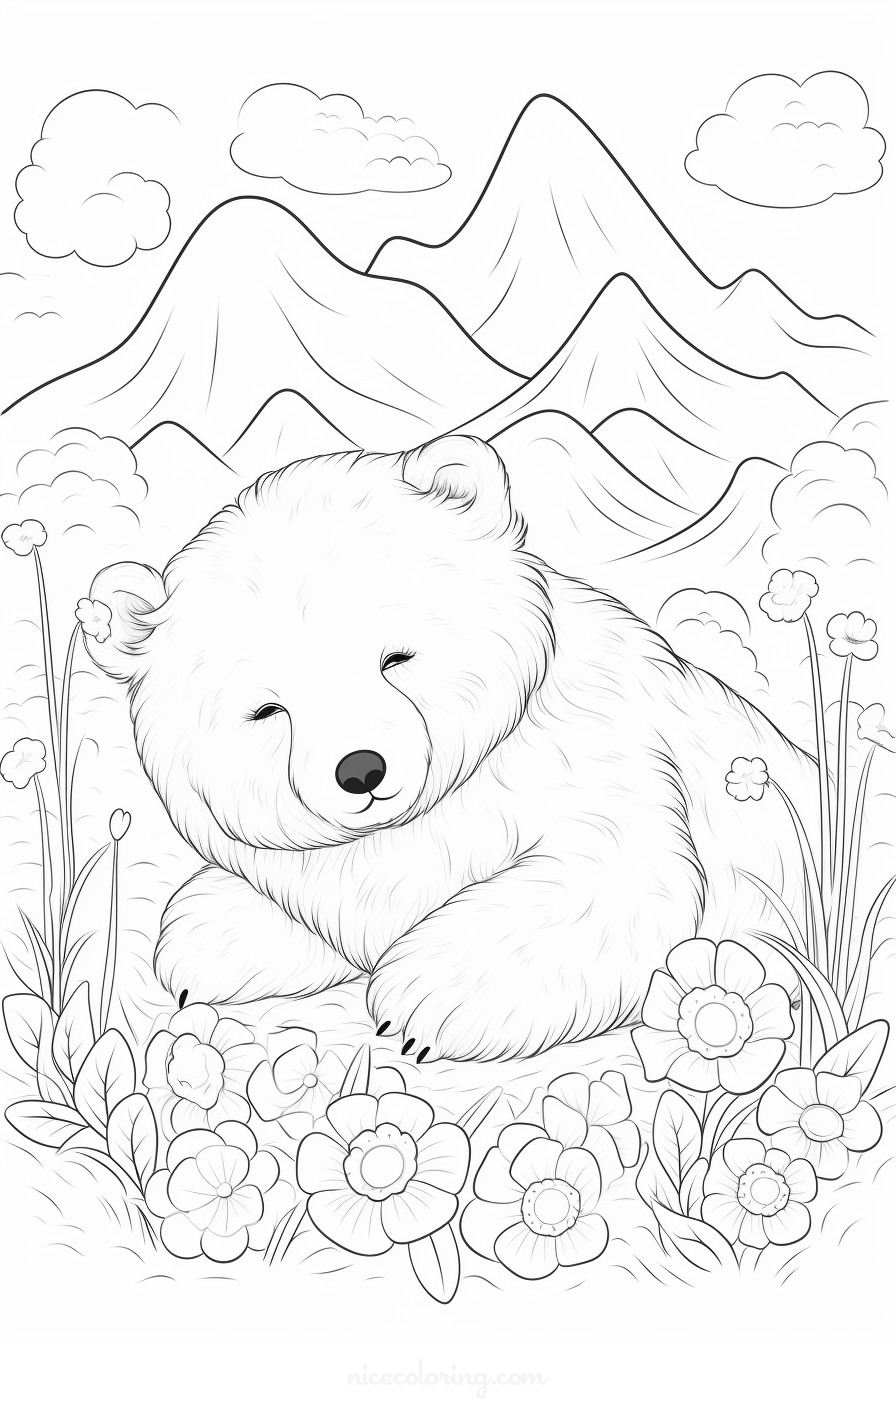 bear family in the forest coloring page